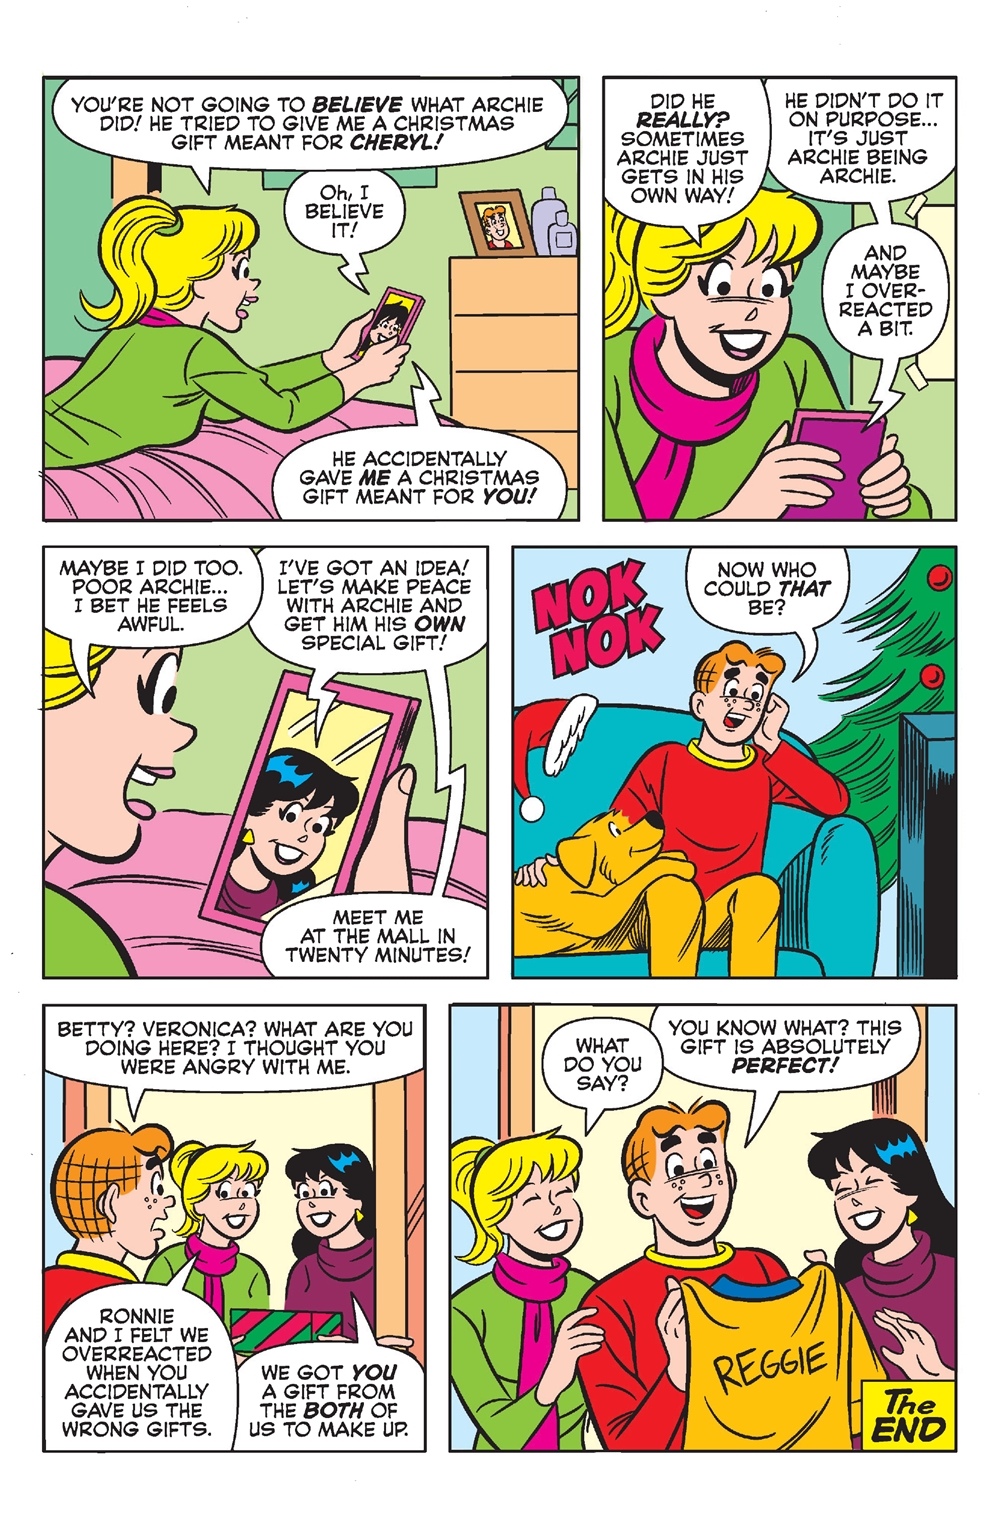 Archie%2527s%2BChristmas%2BSpectacular%2B2020%2B001-027